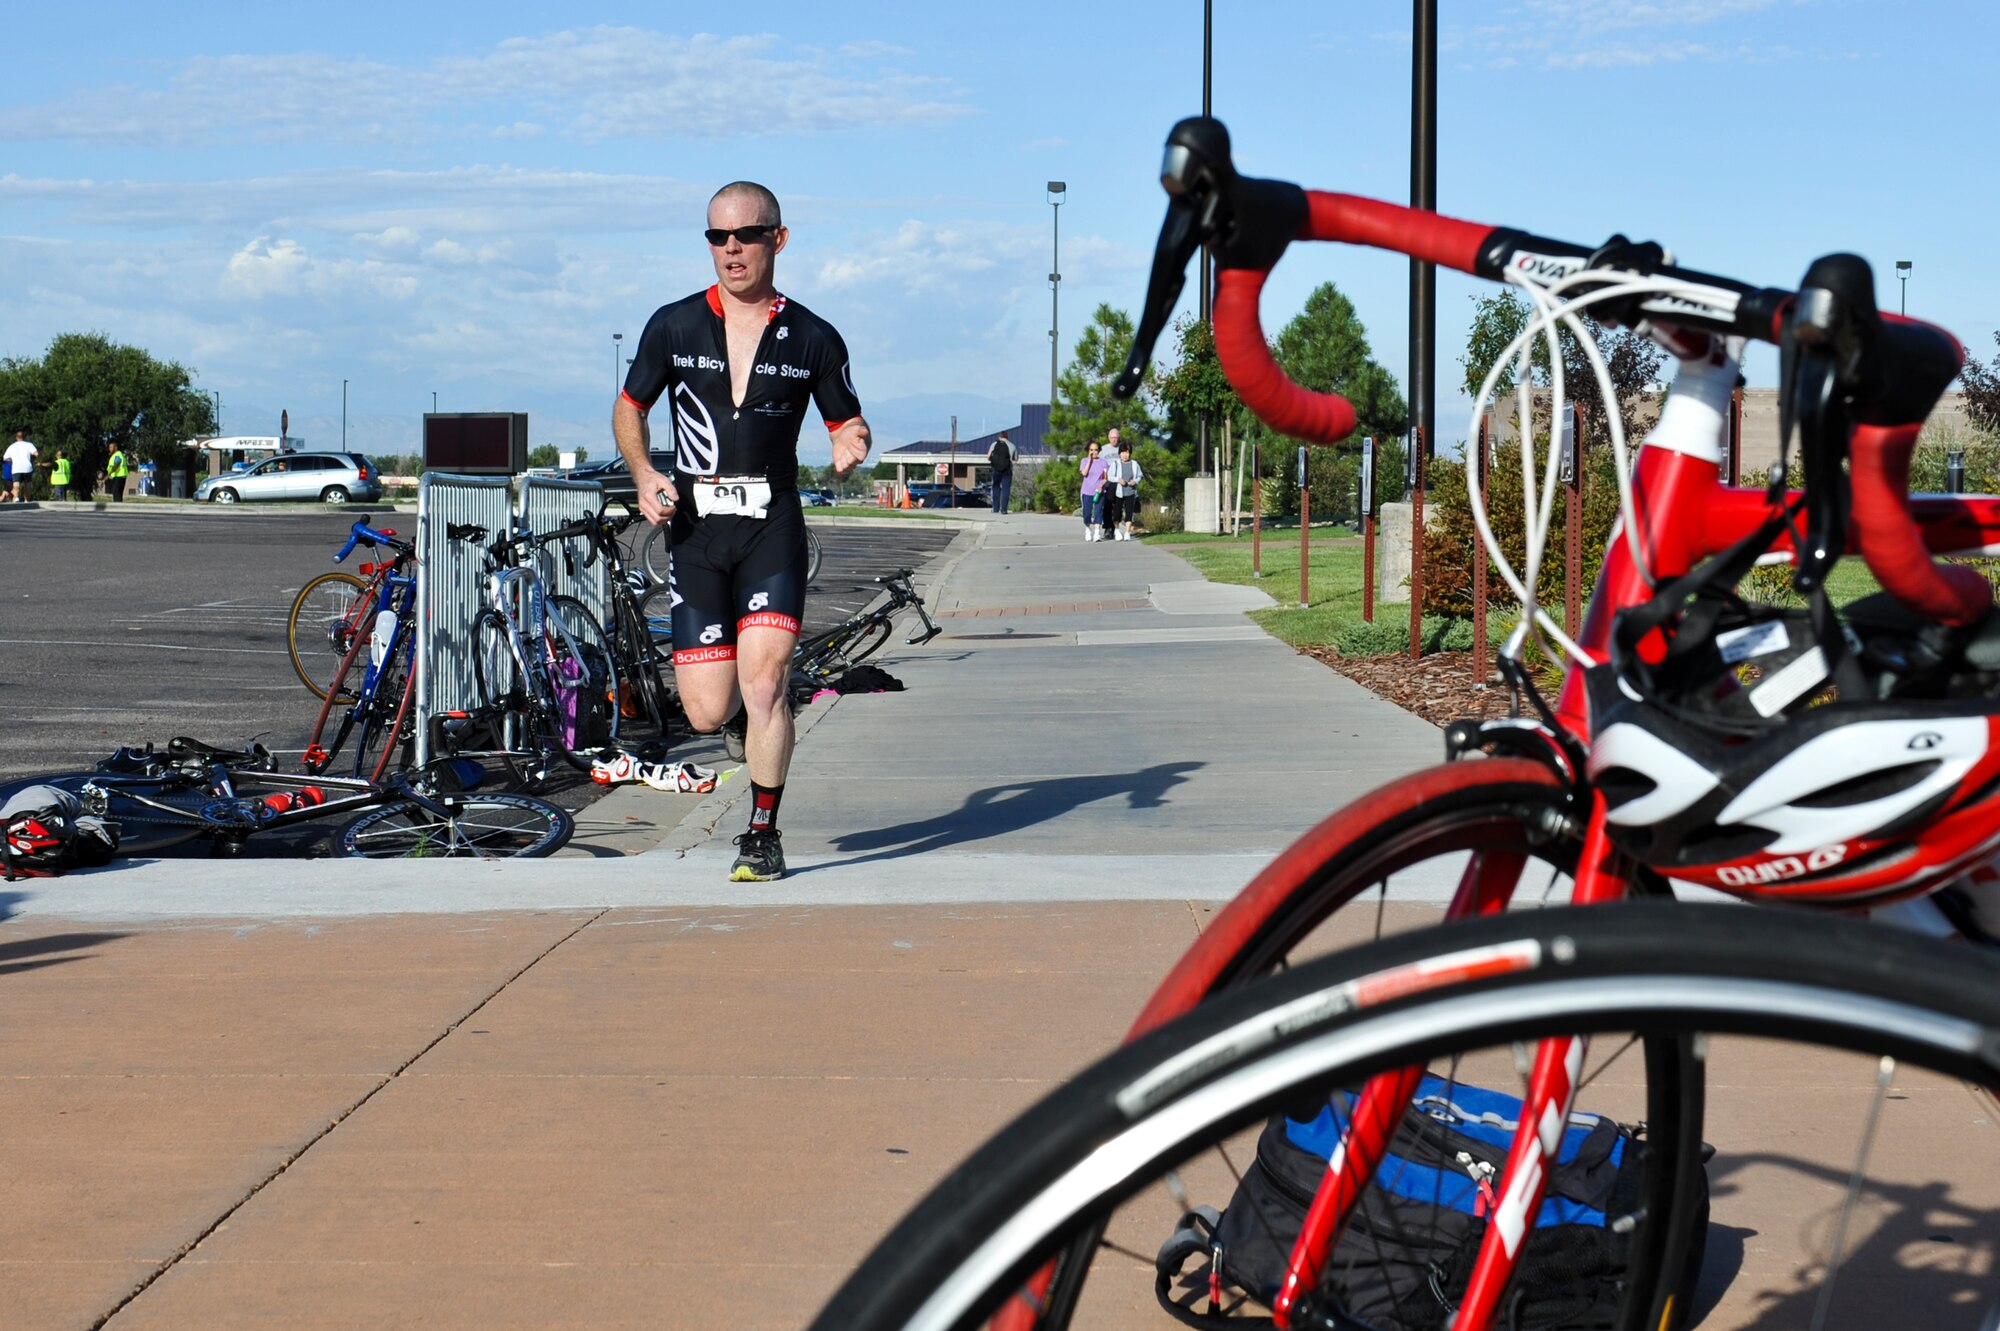 Leslie Handy, 460th Medical Group, sprints to the finish of the 2nd Annual Buckley Duathlon Sept. 19, 2013, on Buckley Air Force Base, Colo. The race started with a 2-mile run, followed by a 6-mile bike ride and finished with a 1.5-mile run. (U.S. Air Force photo by Airman 1st Class Riley Johnson/Released)